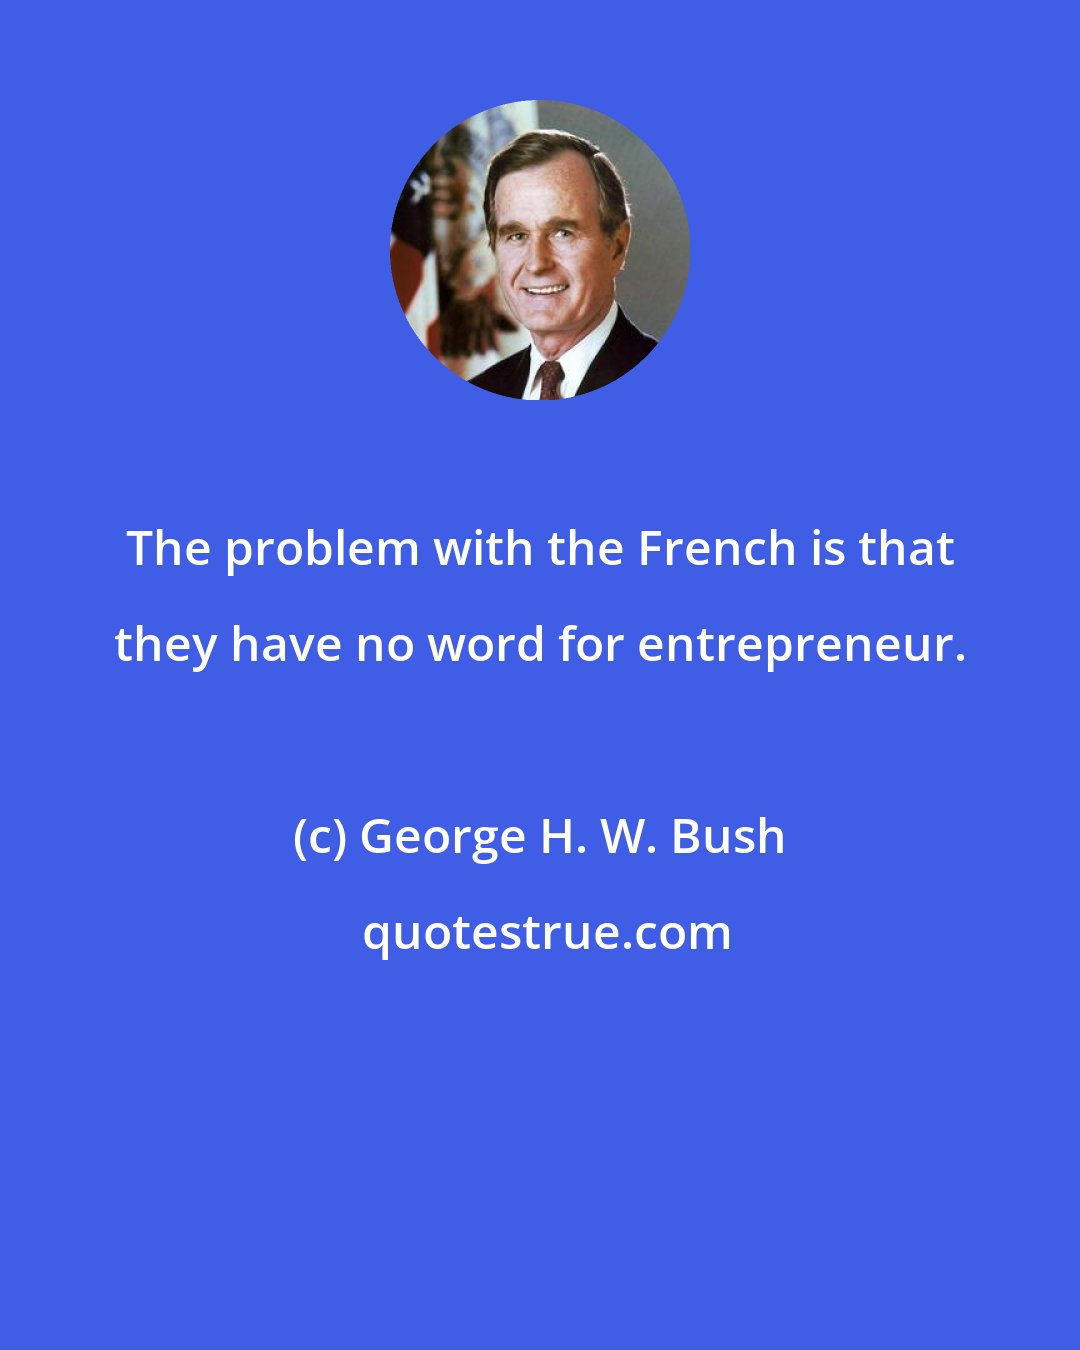 George H. W. Bush: The problem with the French is that they have no word for entrepreneur.